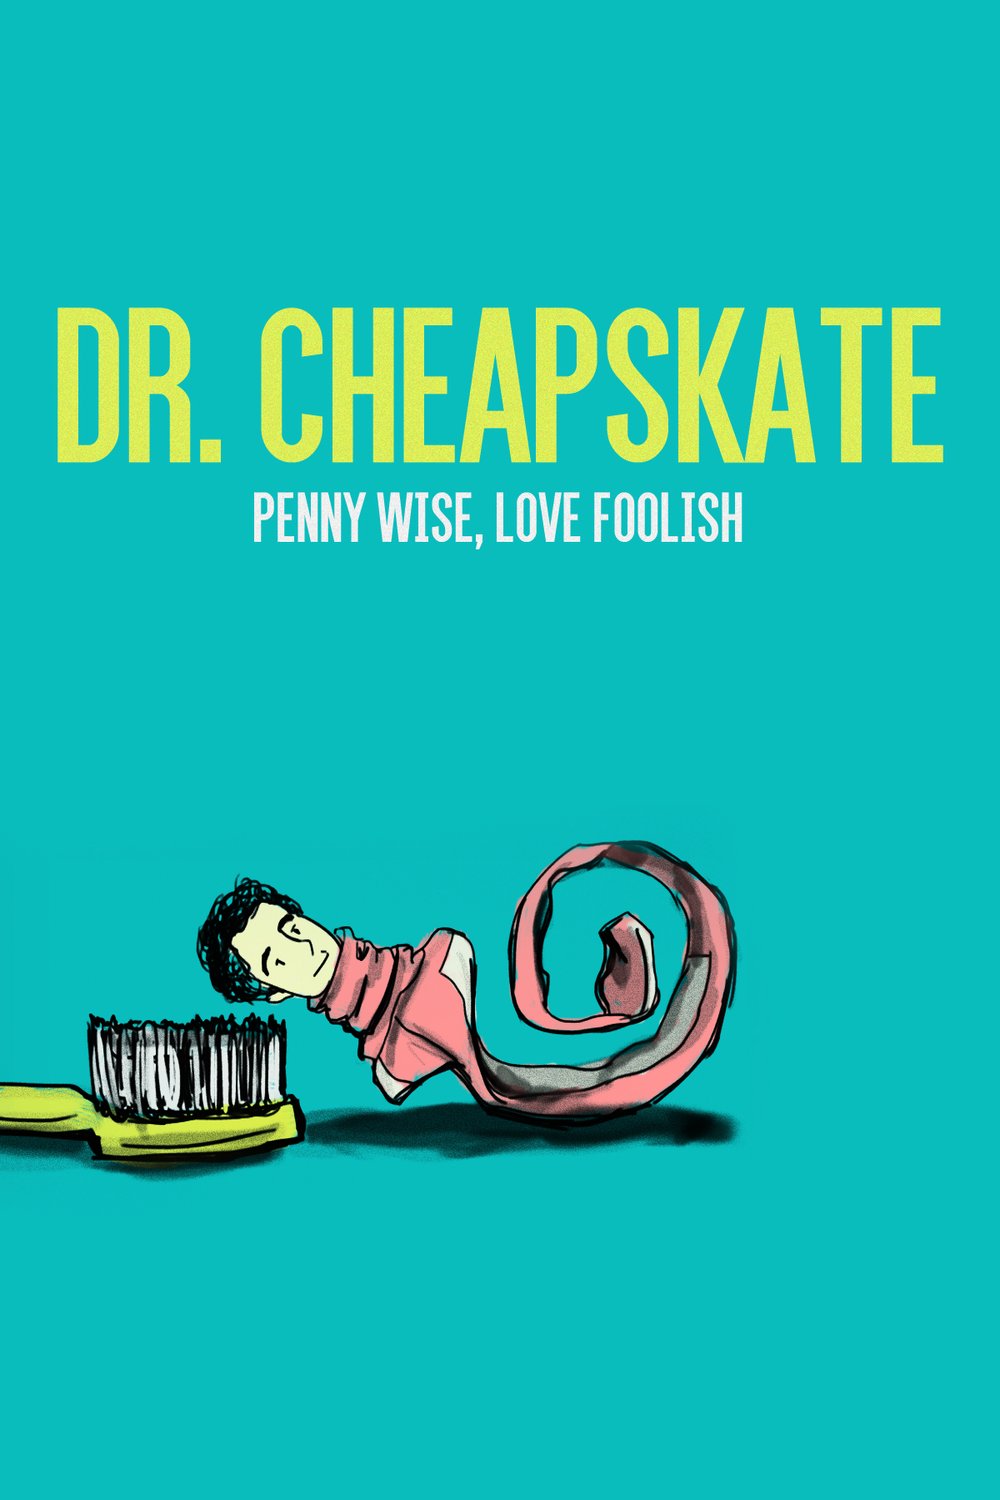 Poster of the movie Dr. Cheapskate